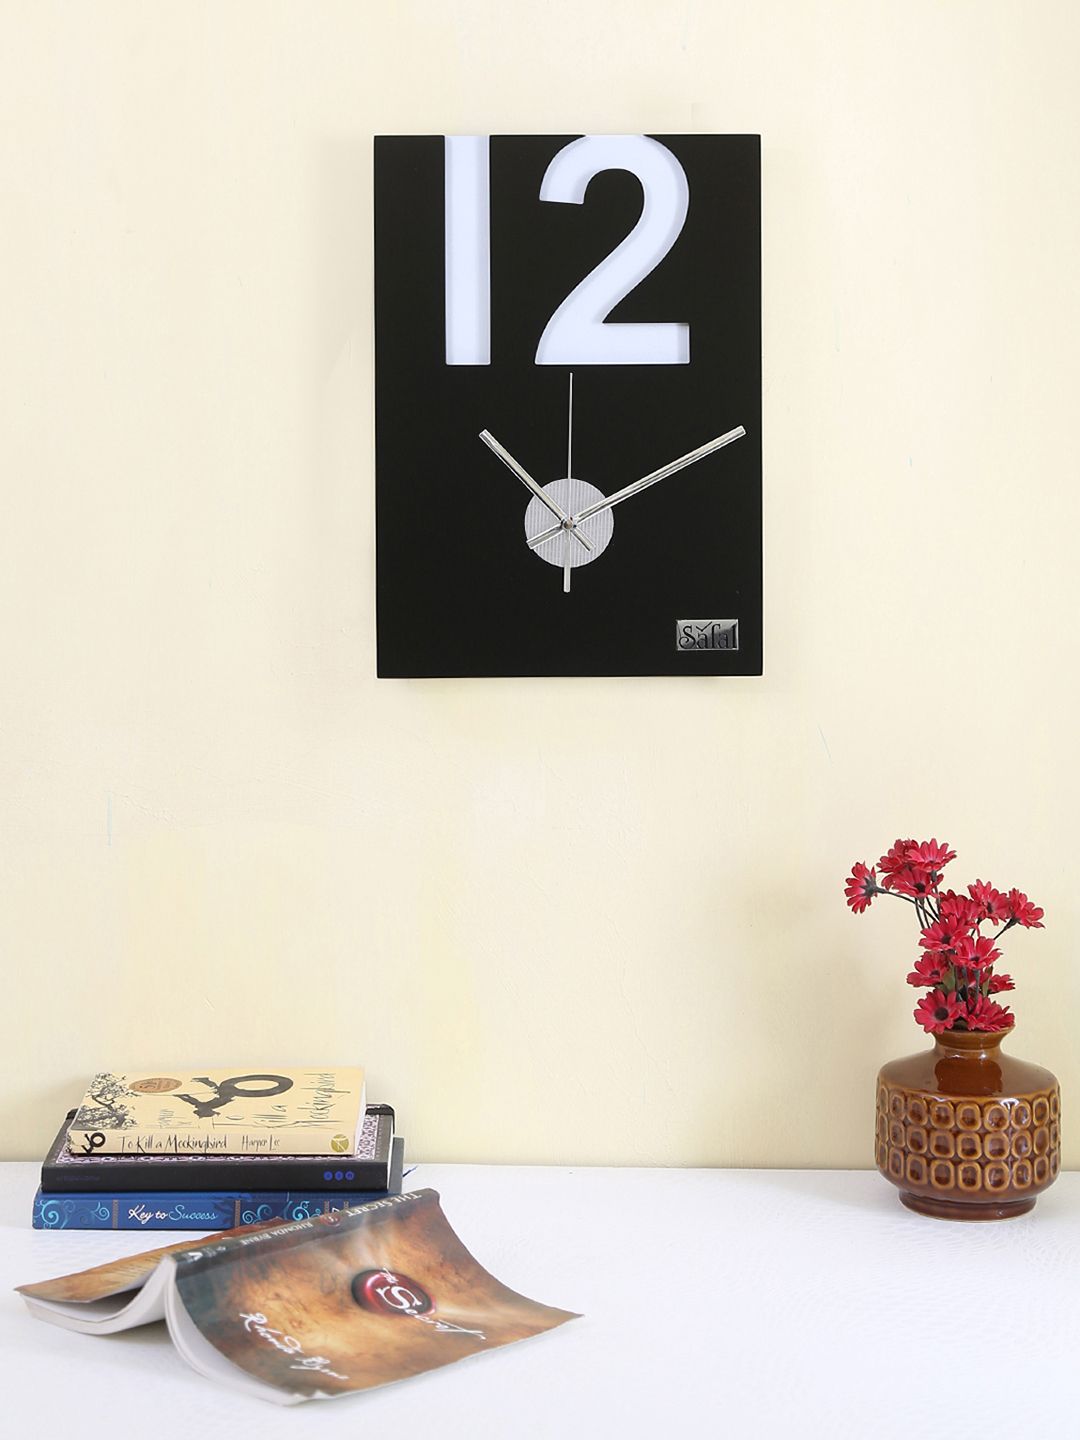 Safal Black & White Dial 35 cm x 25 cm X 6 cm Analogue Wall Clock Price in India